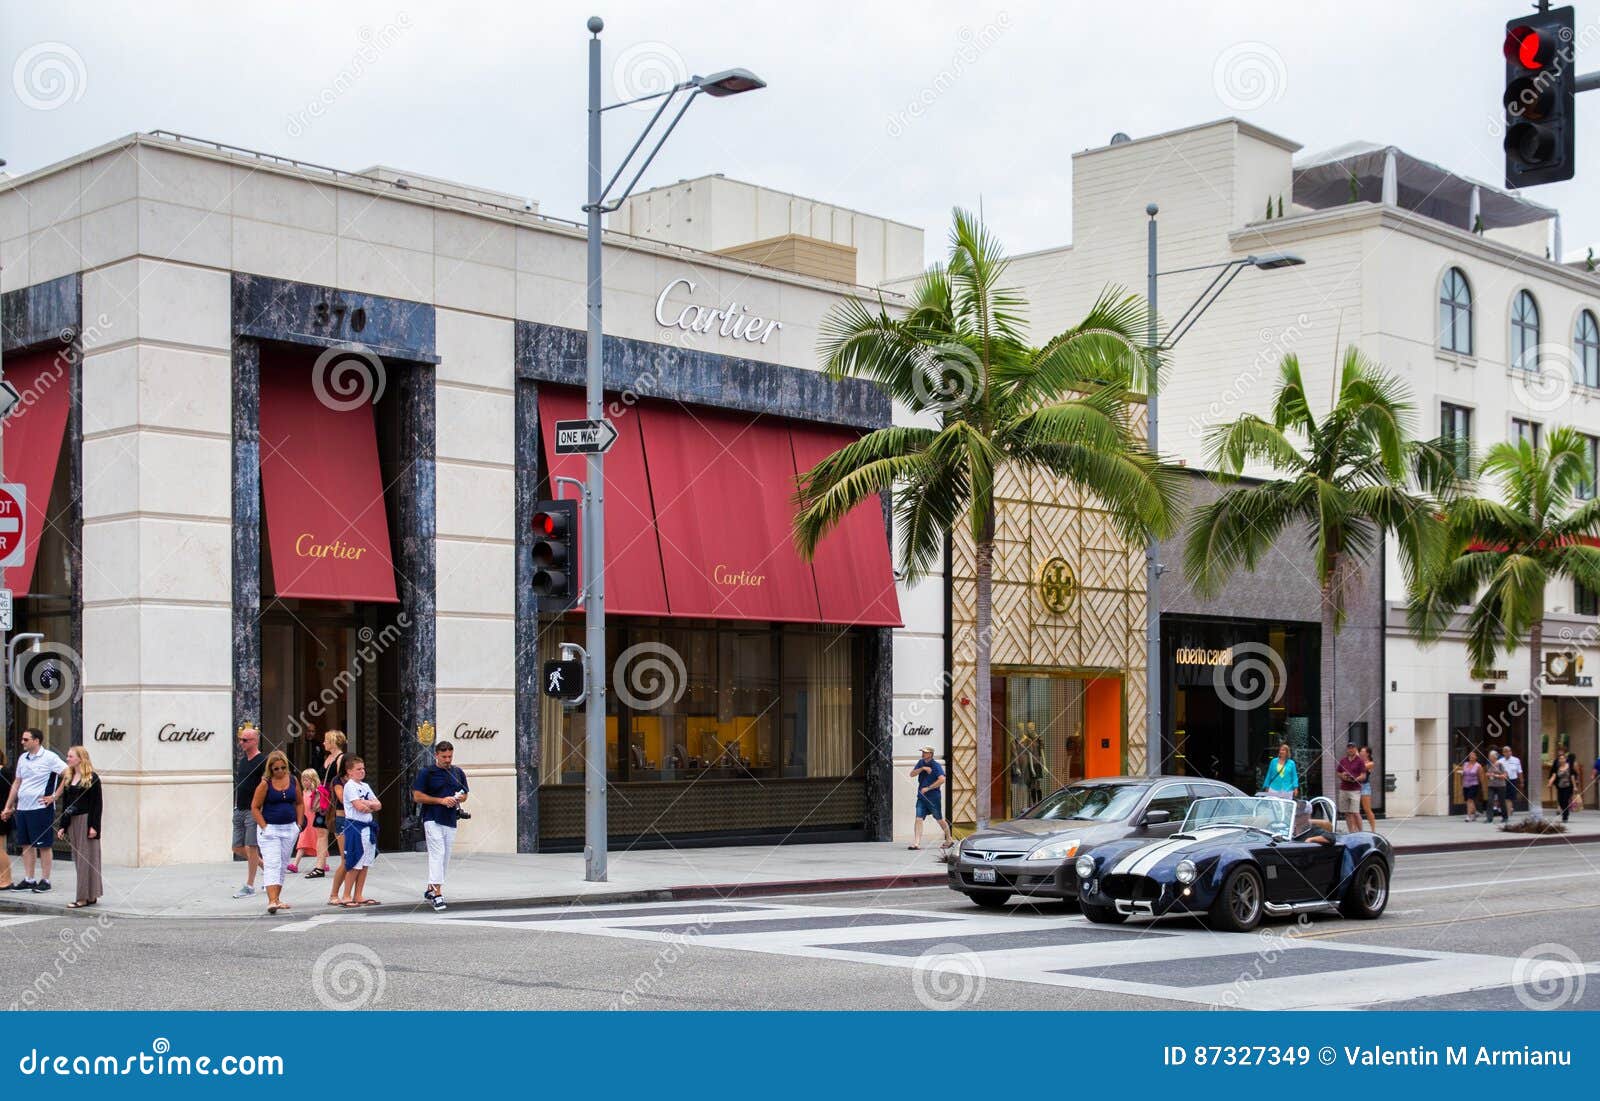 Rodeo Drive, Los Angeles editorial stock image. Image of shopping ...